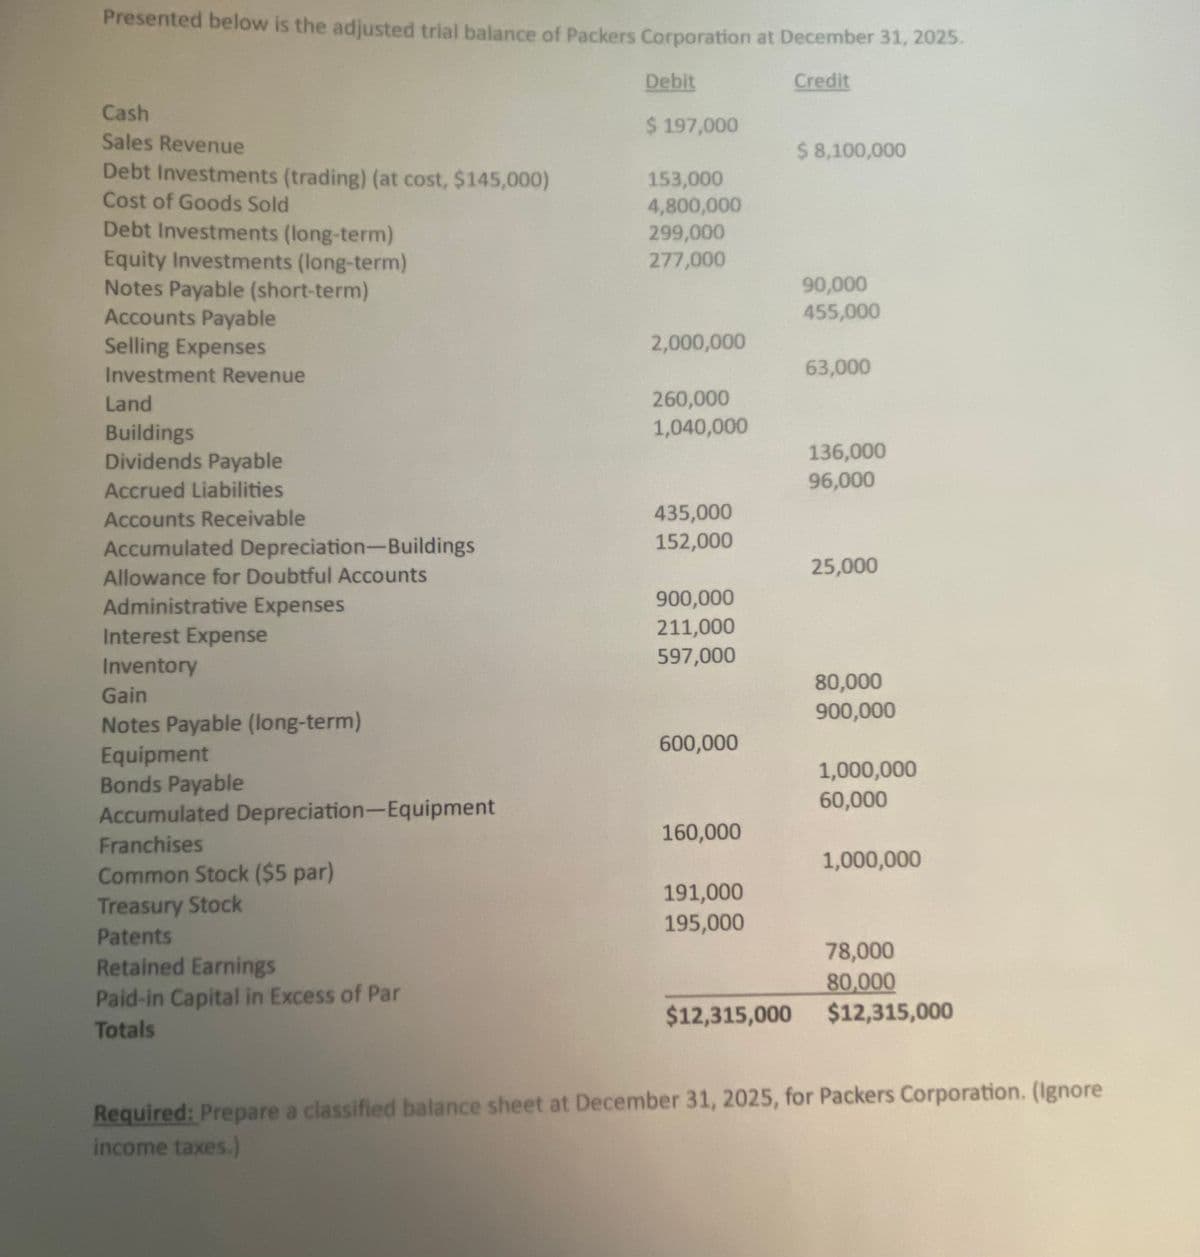 Presented below is the adjusted trial balance of Packers Corporation at December 31, 2025.
Debit
Credit
Cash
$ 197,000
Sales Revenue
$ 8,100,000
Debt Investments (trading) (at cost, $145,000)
153,000
Cost of Goods Sold
Debt Investments (long-term)
Equity Investments (long-term)
Notes Payable (short-term)
Accounts Payable
Selling Expenses
Investment Revenue
Land
Buildings
Dividends Payable
4,800,000
299,000
277,000
90,000
455,000
2,000,000
63,000
260,000
1,040,000
136,000
Accrued Liabilities
96,000
Accounts Receivable
435,000
Accumulated Depreciation-Buildings
152,000
Allowance for Doubtful Accounts
25,000
Administrative Expenses
900,000
Interest Expense
211,000
Inventory
597,000
Gain
80,000
Notes Payable (long-term)
900,000
Equipment
600,000
Bonds Payable
1,000,000
Accumulated Depreciation-Equipment
60,000
Franchises
160,000
Common Stock ($5 par)
1,000,000
Treasury Stock
191,000
Patents
195,000
Retained Earnings
78,000
Paid-in Capital in Excess of Par
80,000
Totals
$12,315,000
$12,315,000
Required: Prepare a classified balance sheet at December 31, 2025, for Packers Corporation. (Ignore
income taxes.)